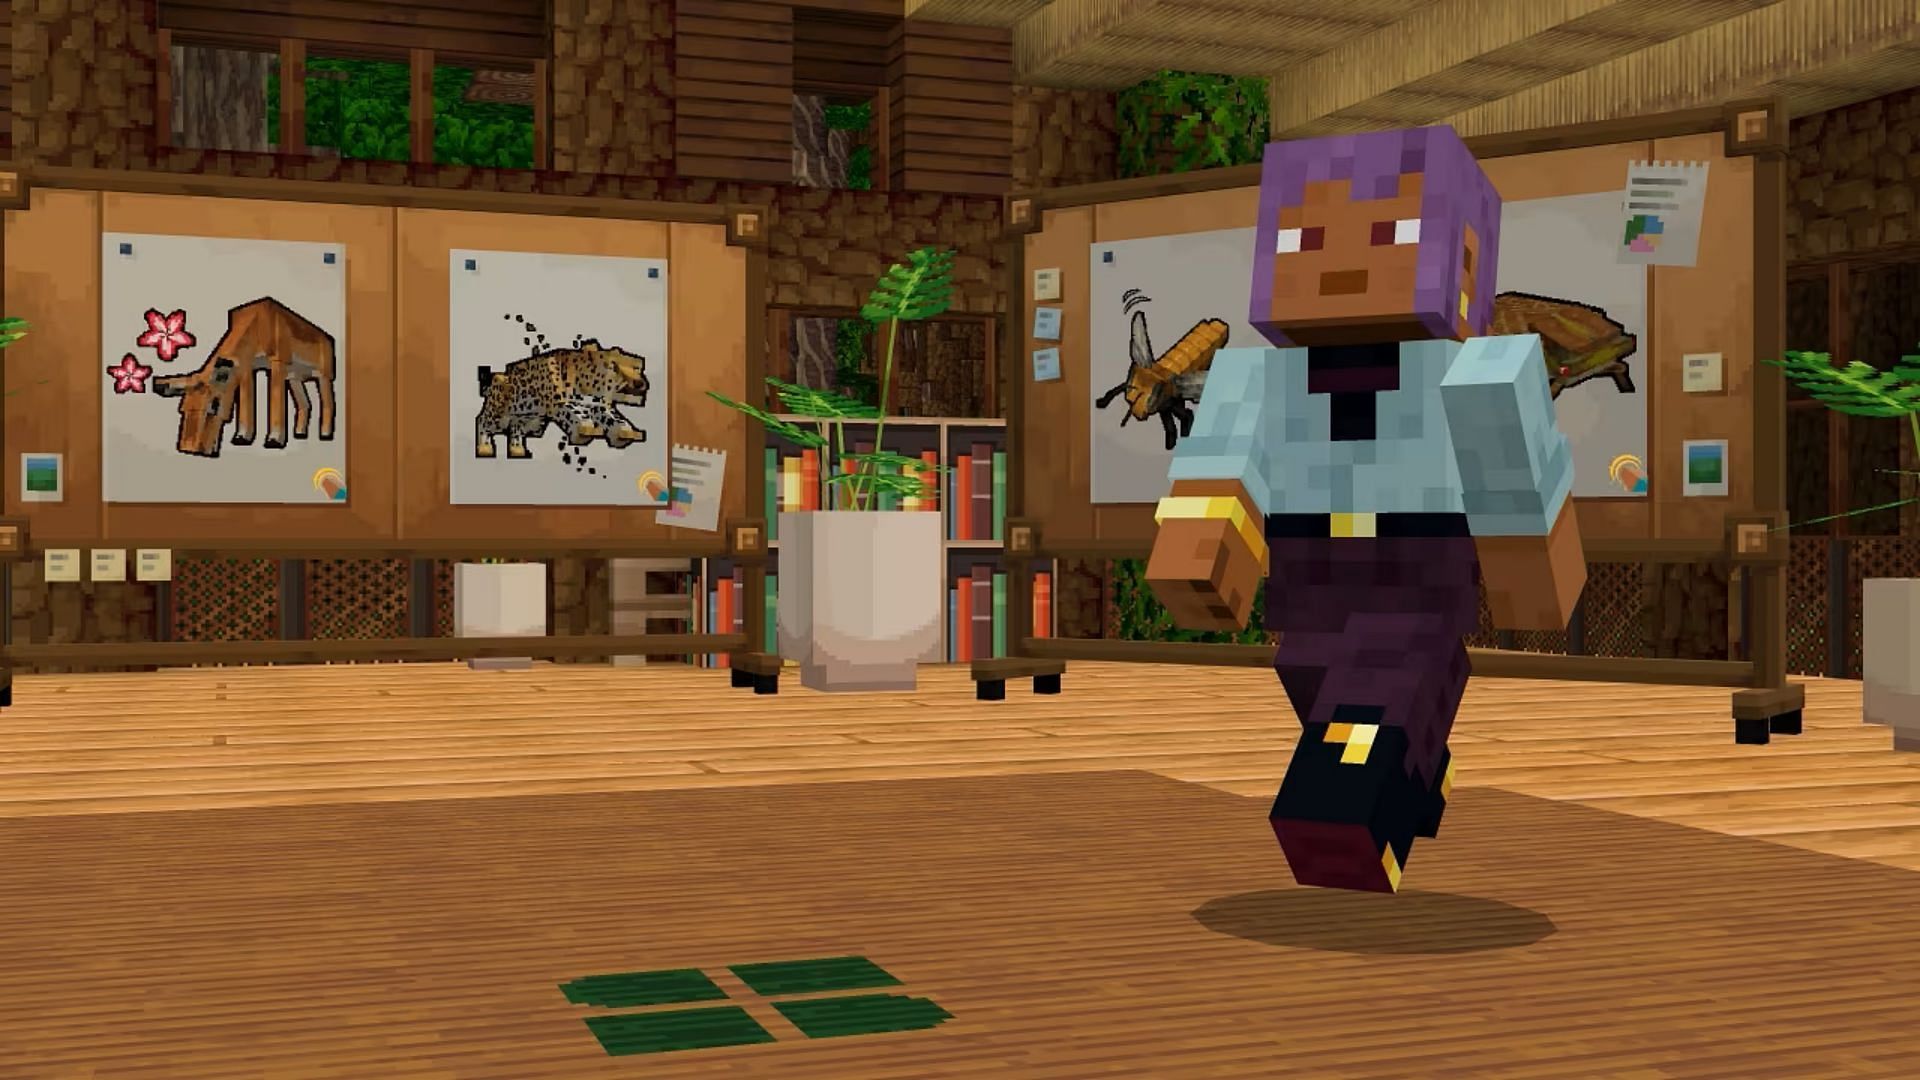 Players can monitor their activity and rewards from the DLC via the Field Station inside the DLC (Image via Mojang)